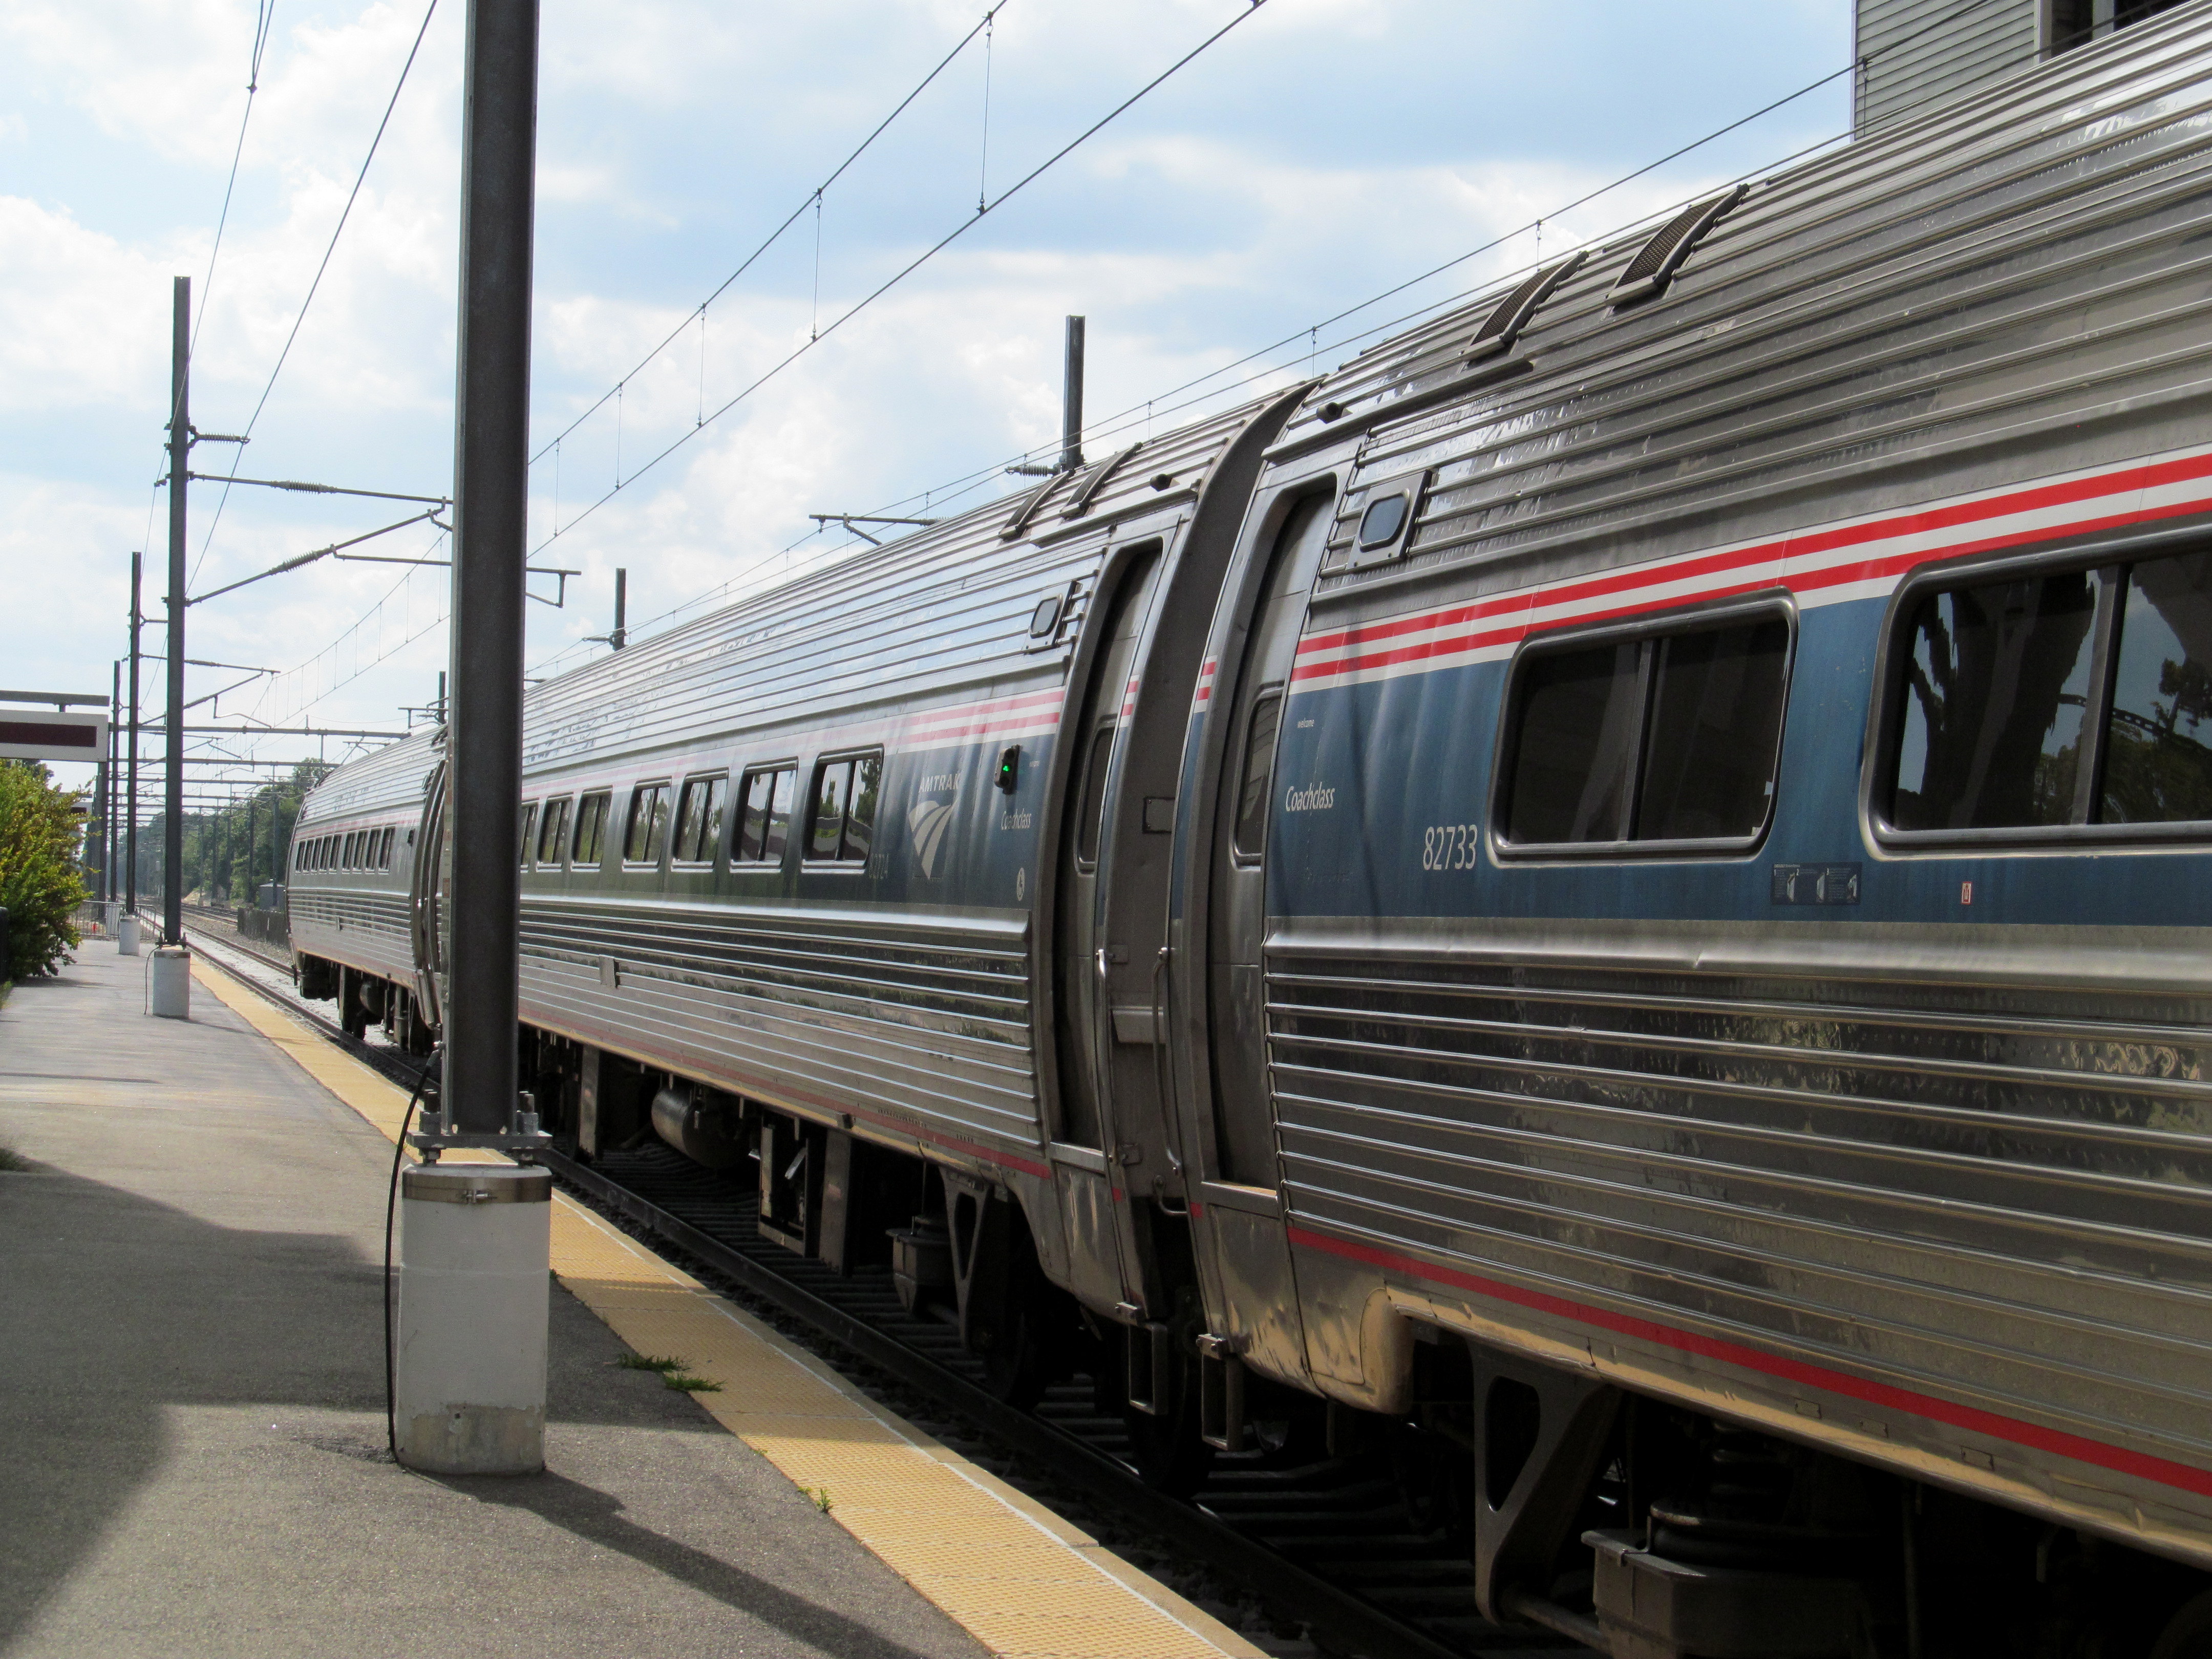 Corrugated silver tubular rail cars with red, white, and blue striping